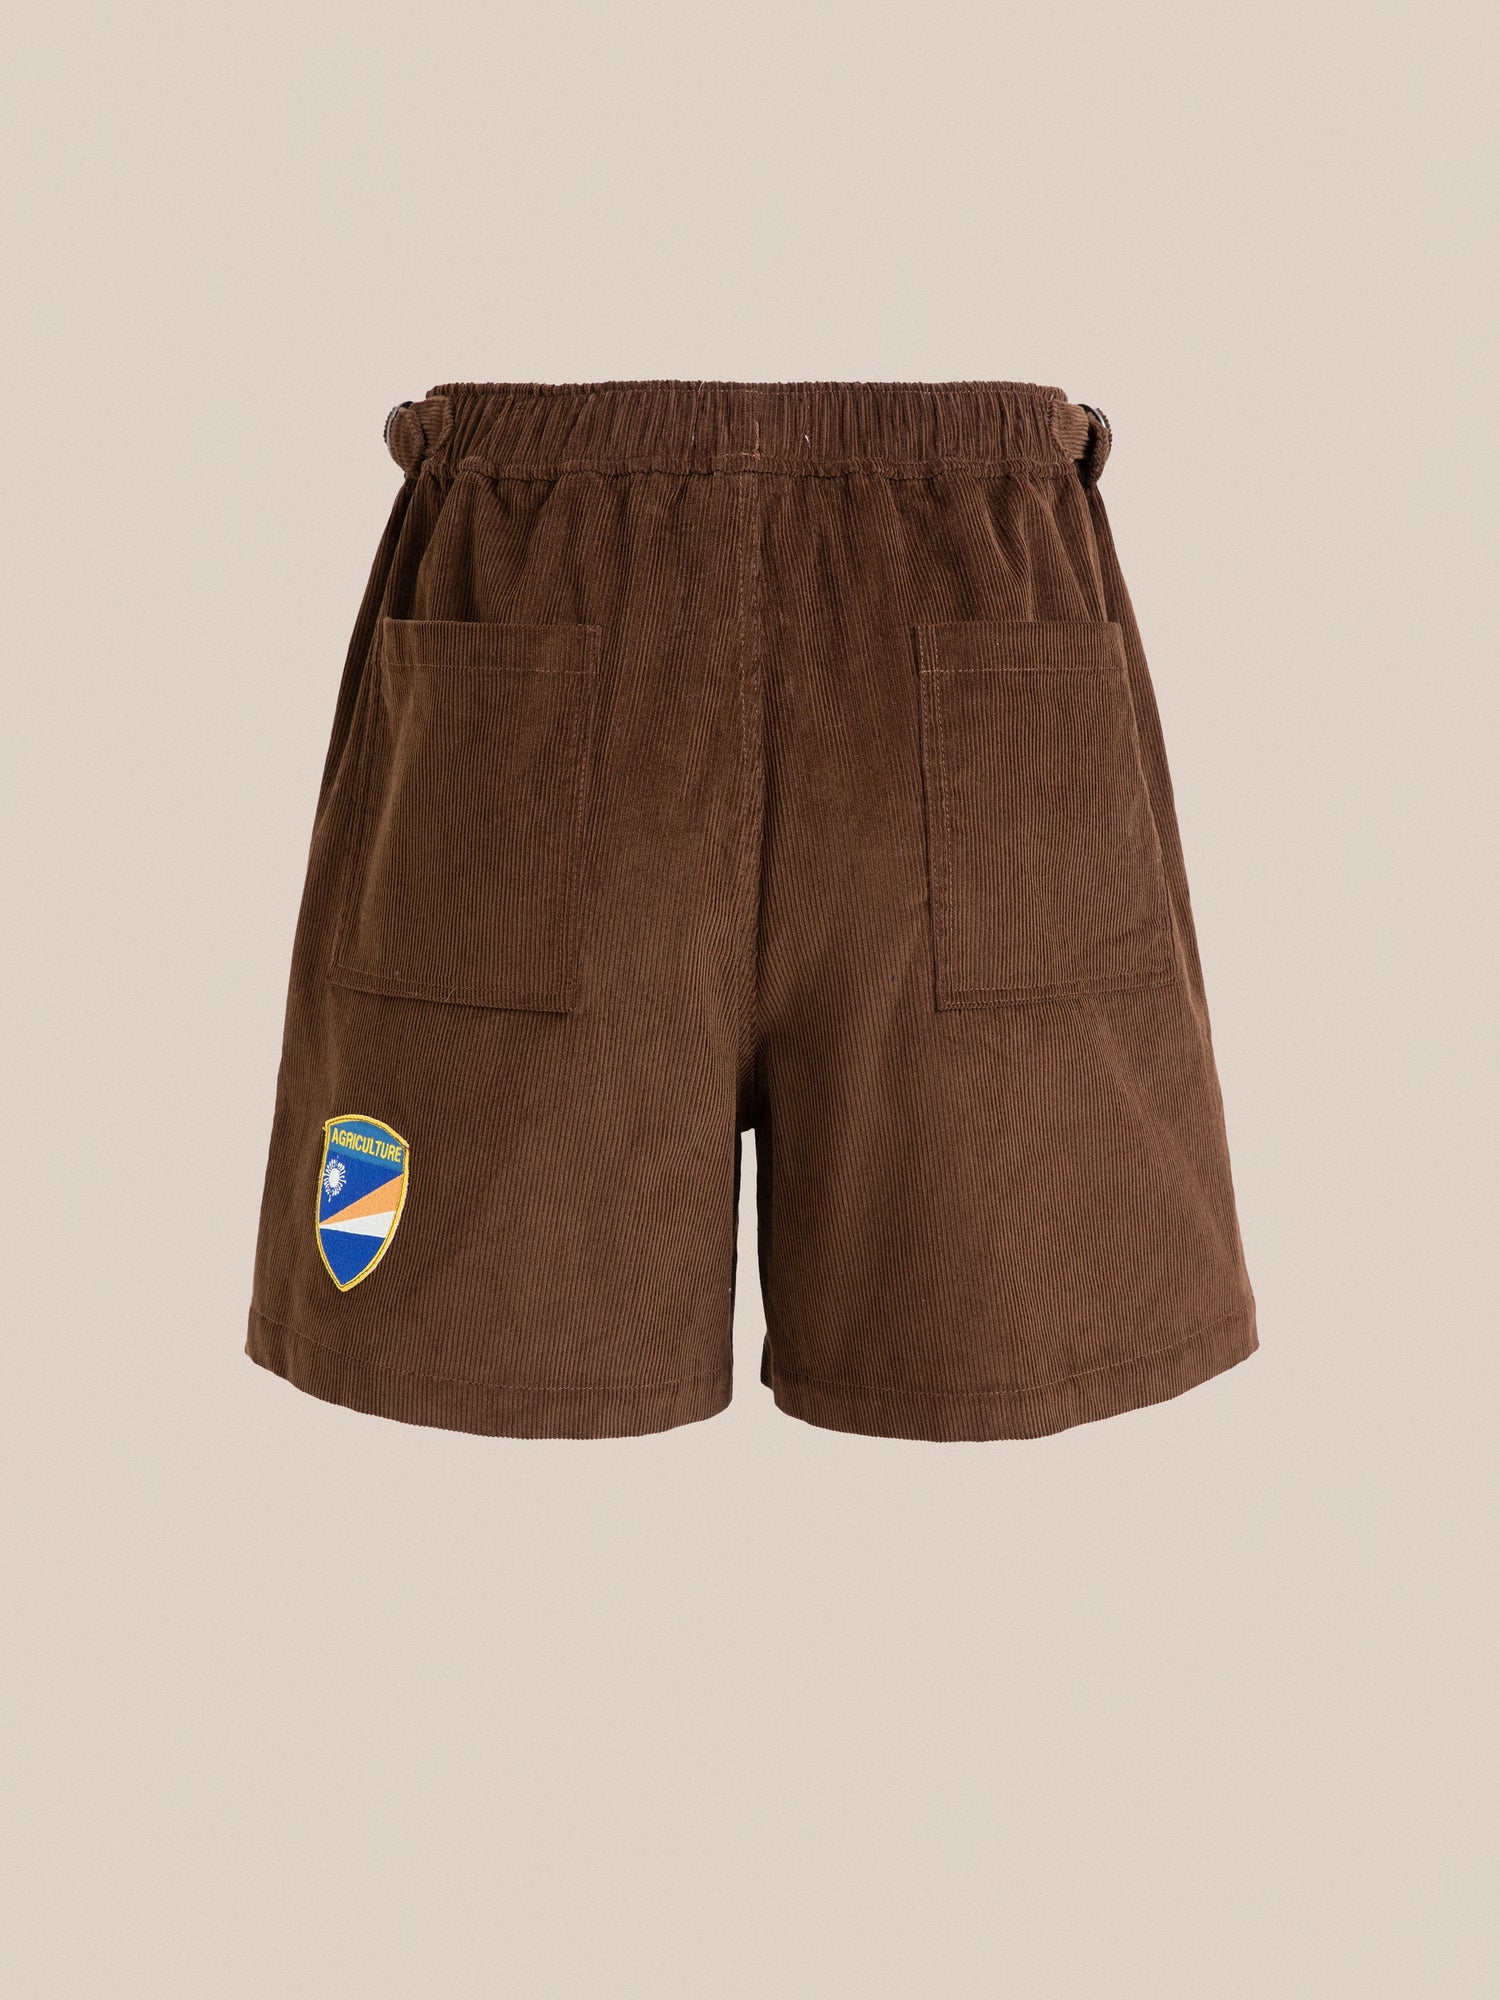 A brown Canoe Multi Patch Corduroy Shorts with a blue and yellow cricket sport crest patch by Found.